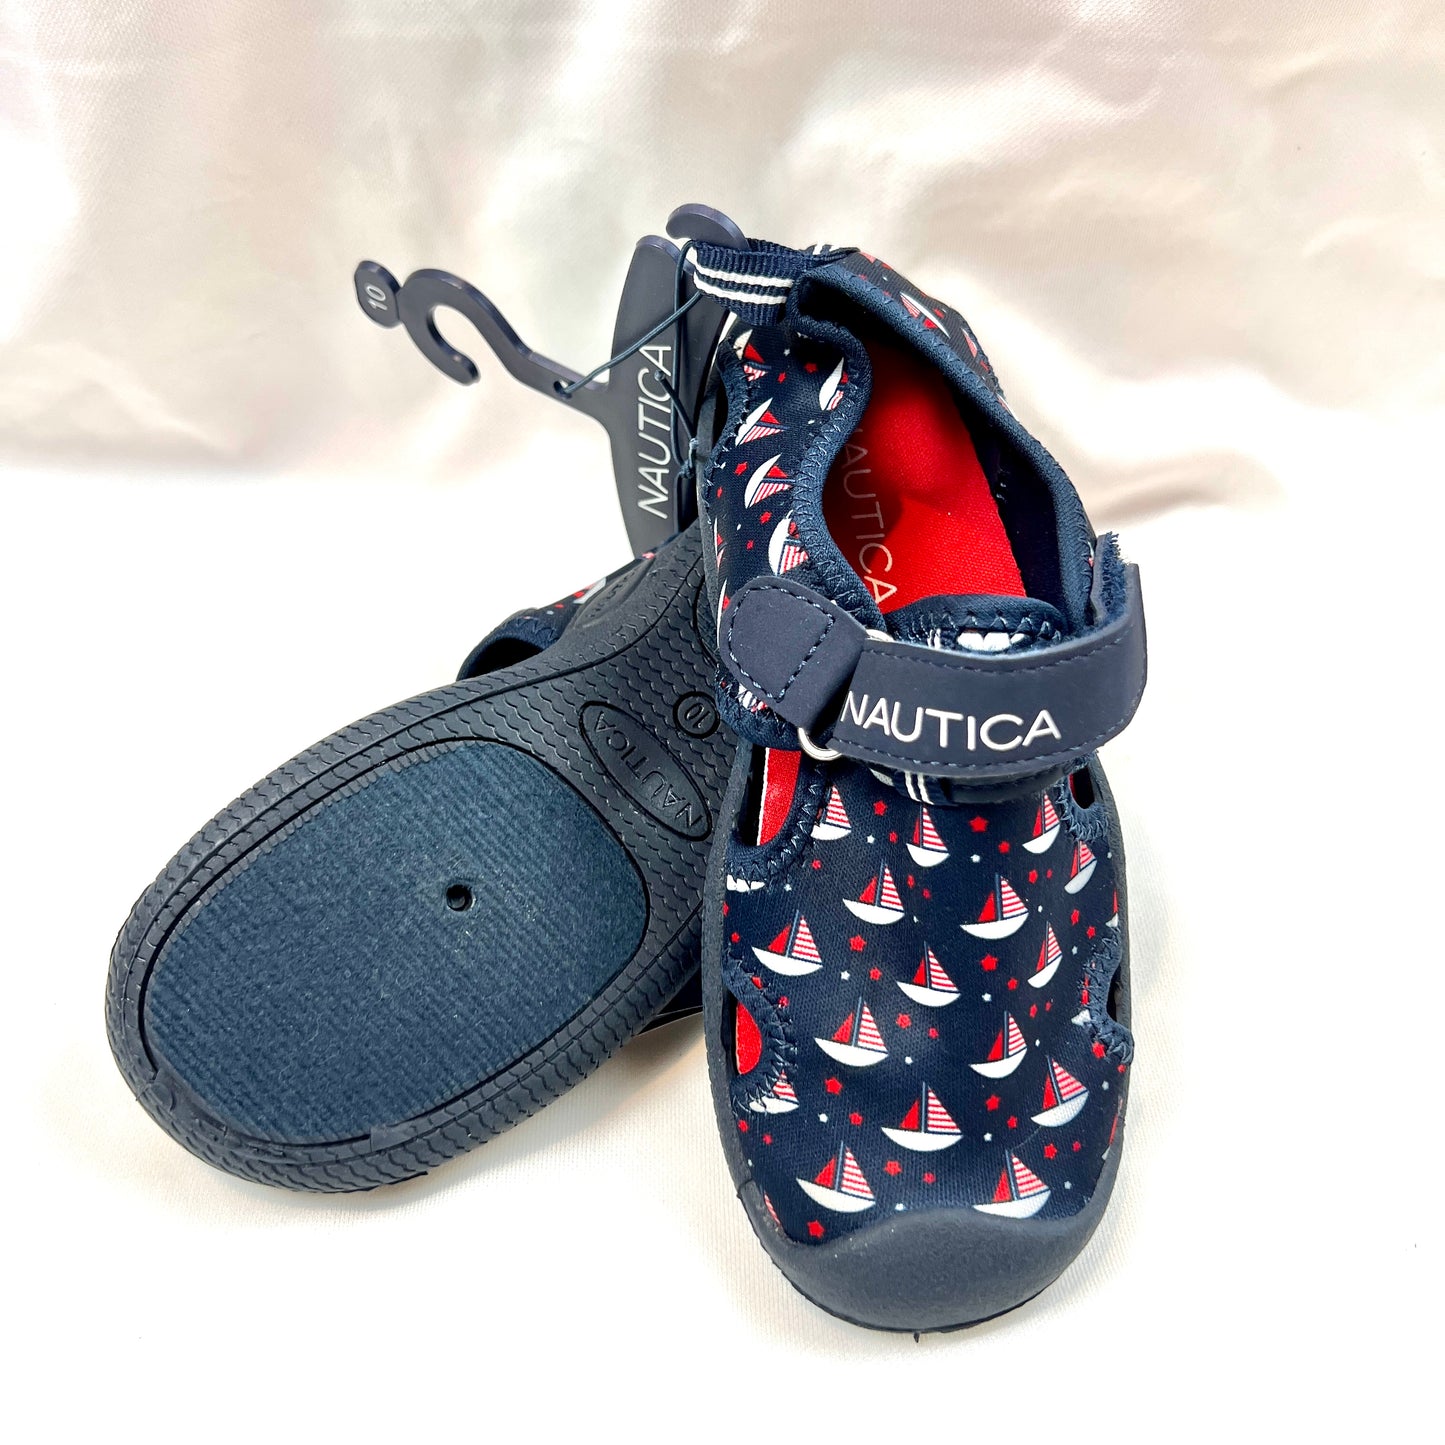 NEW Nautica Water Shoe Boy Girl Neutral Size 10 Sail Boats Nautical Theme NWT Navy Blue Red